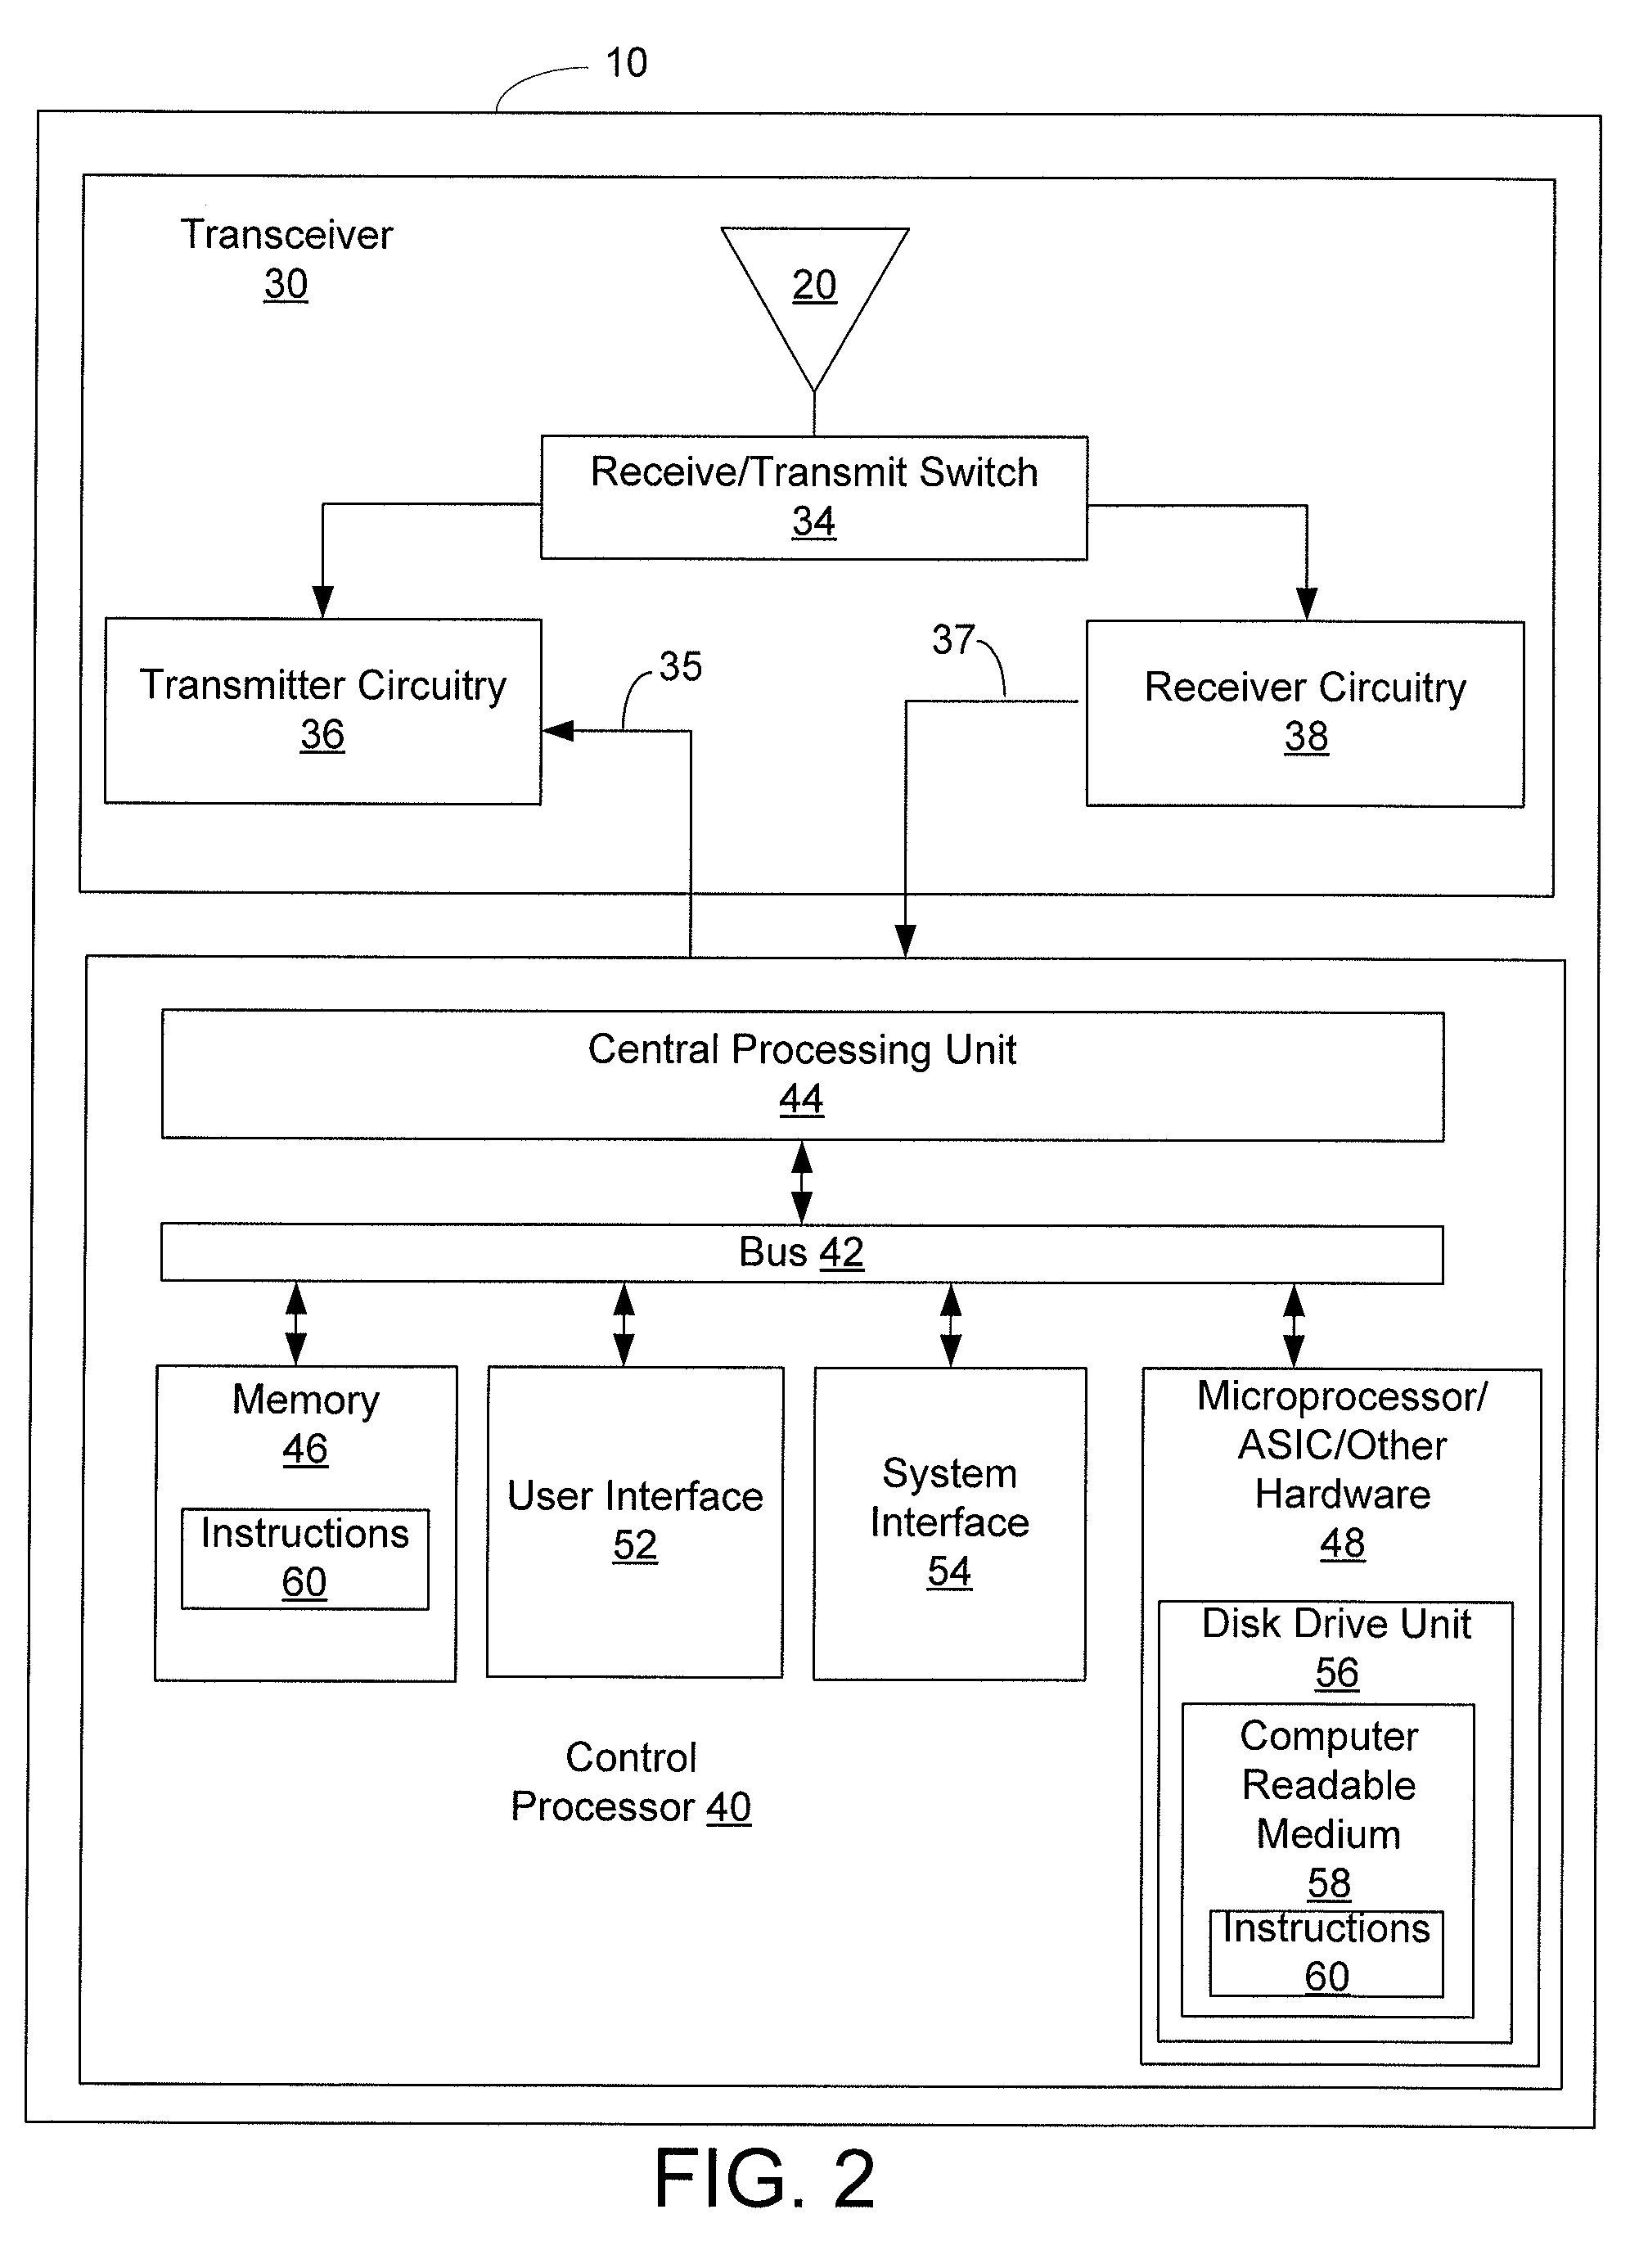 Gait based notification and control of portable devices